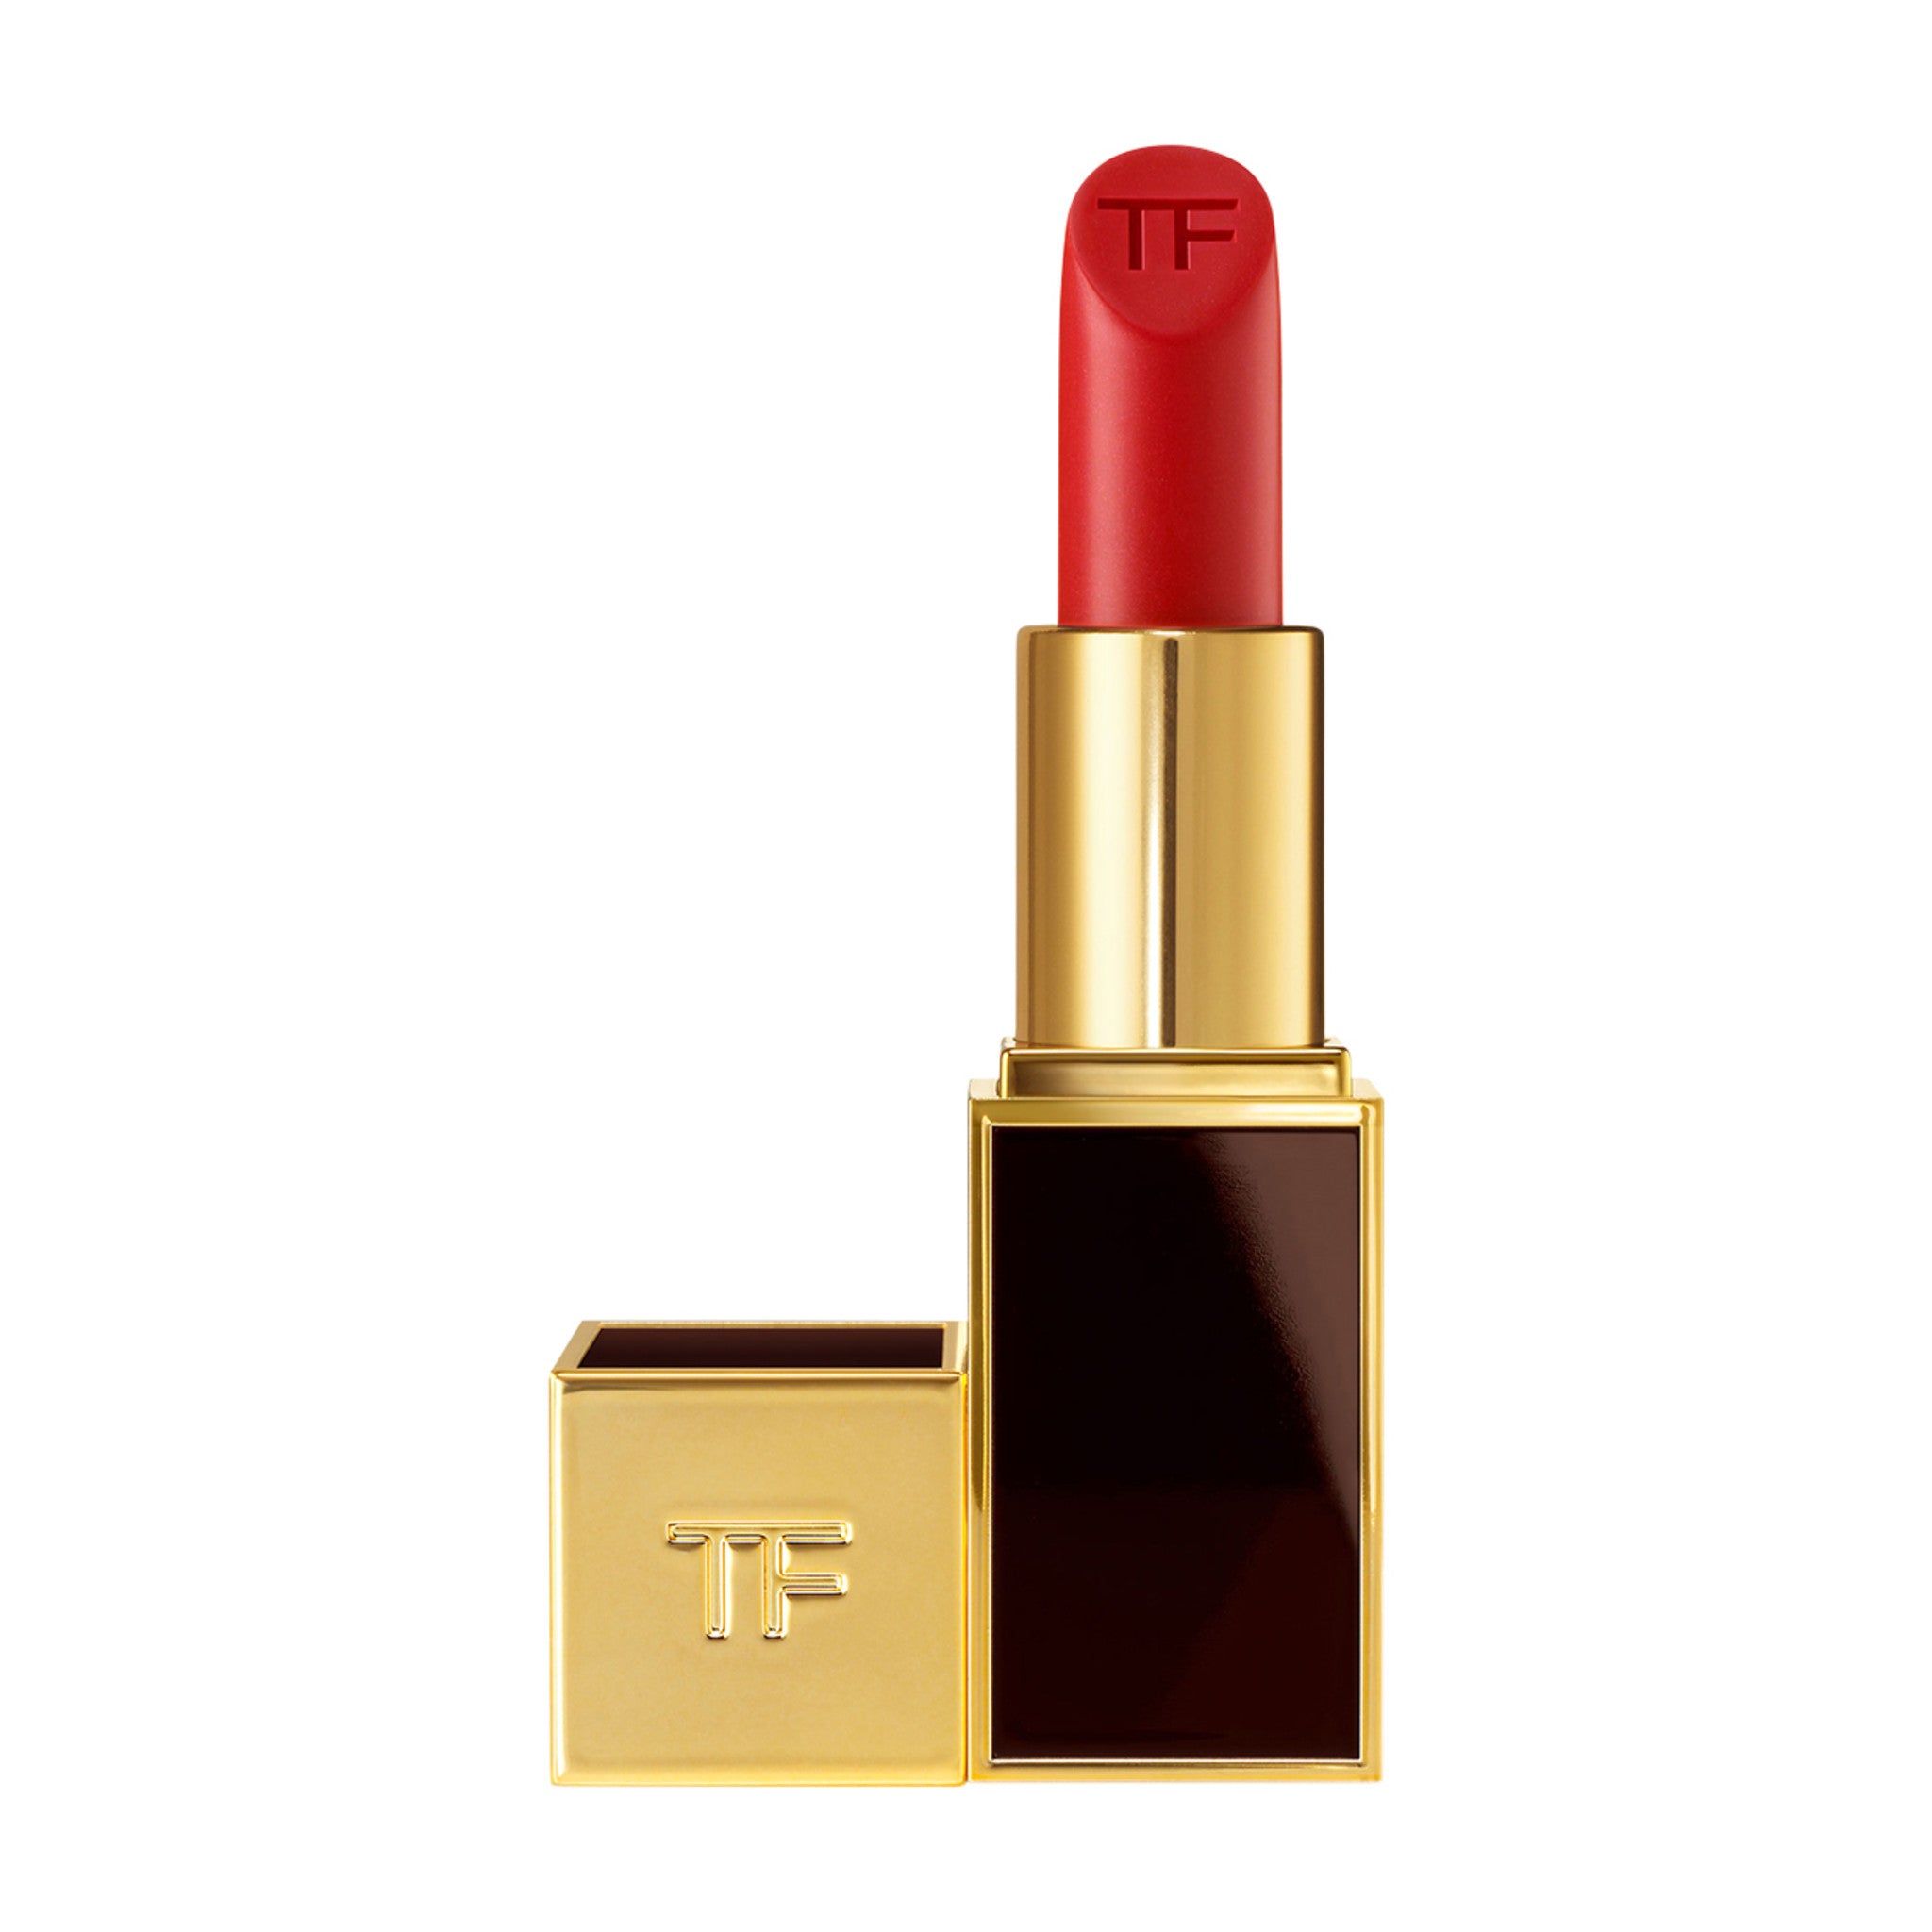 Tom Ford Lip Color Lipstick Color/Shade variant: 75 Jasmin Rouge main image. This product is in the color orange